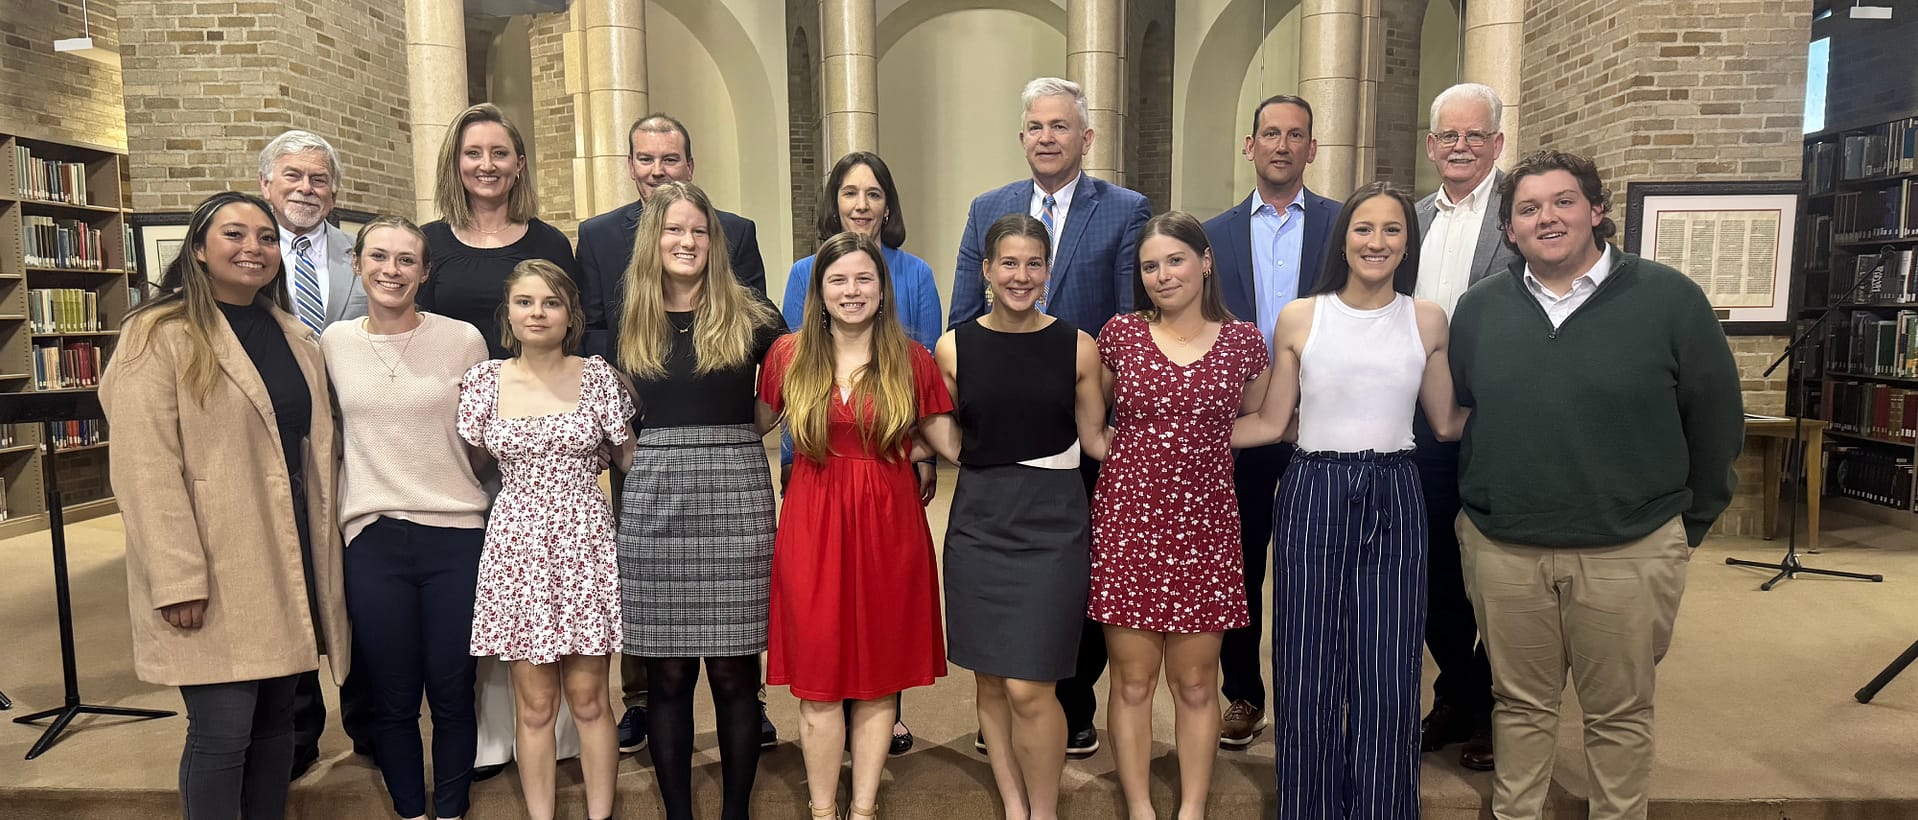 nine student-athletes stand in row with presenters in library